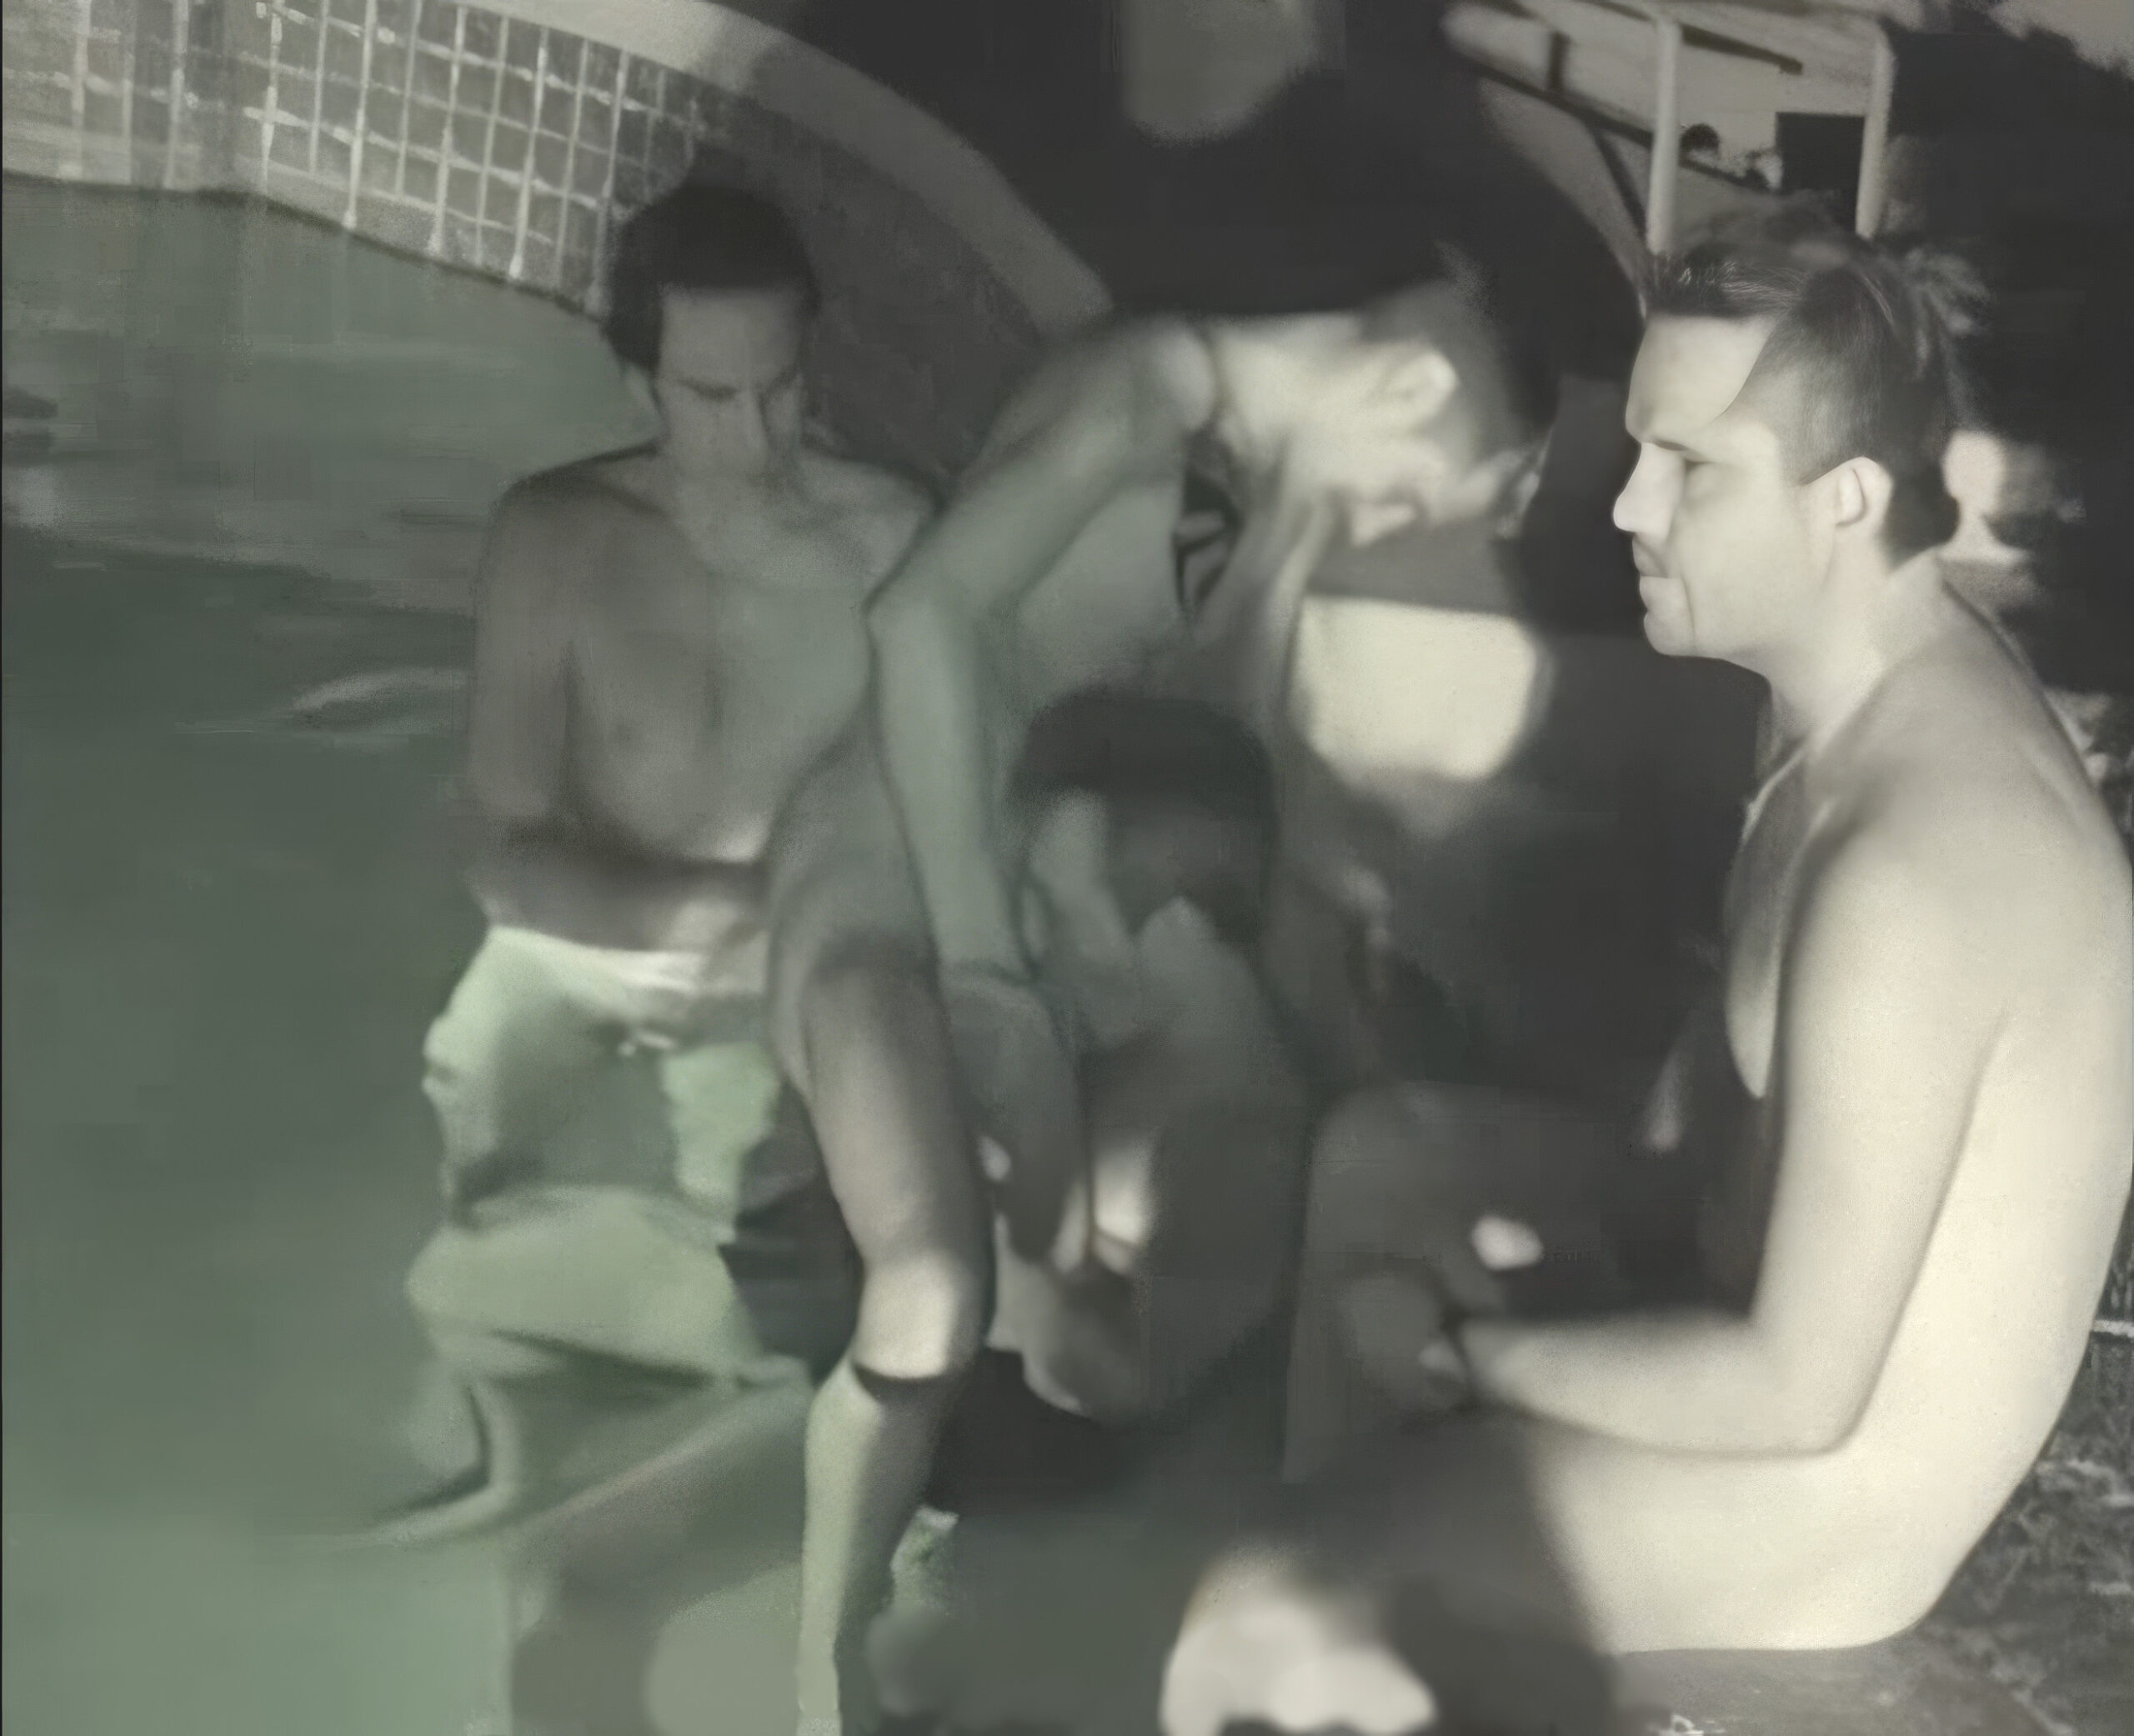 Tom and Axe – Skinny dipping, sucking, rimming, fingering… !!